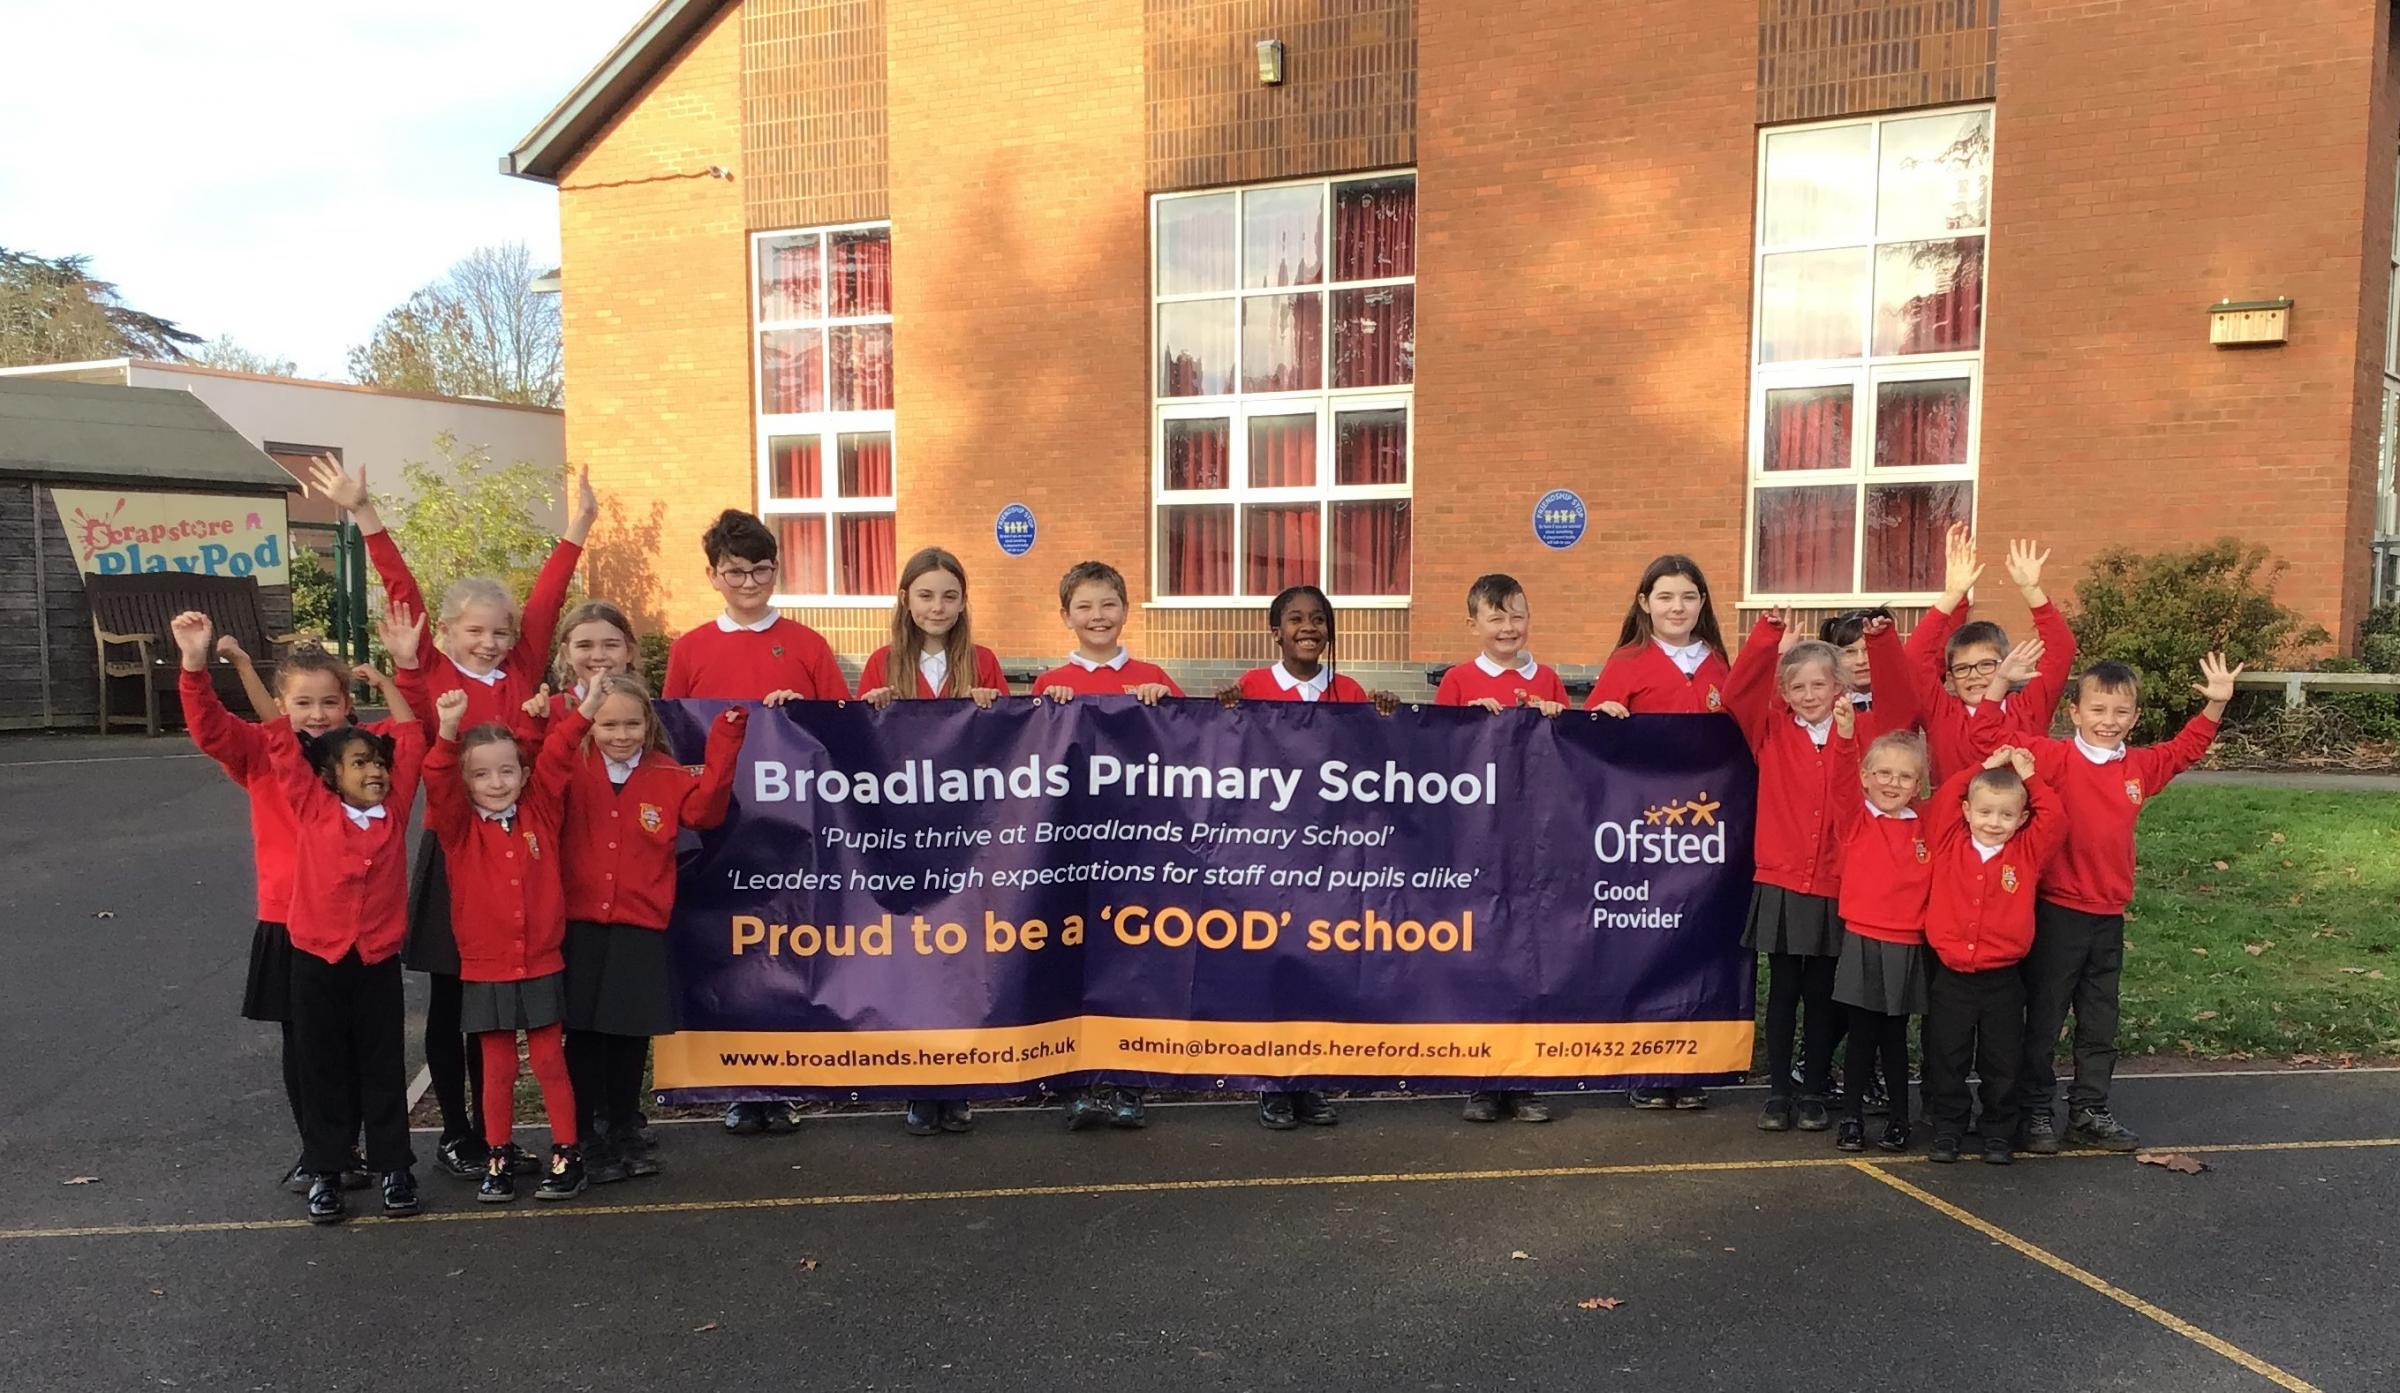 Broadlands has recieved a good rating from Ofsted